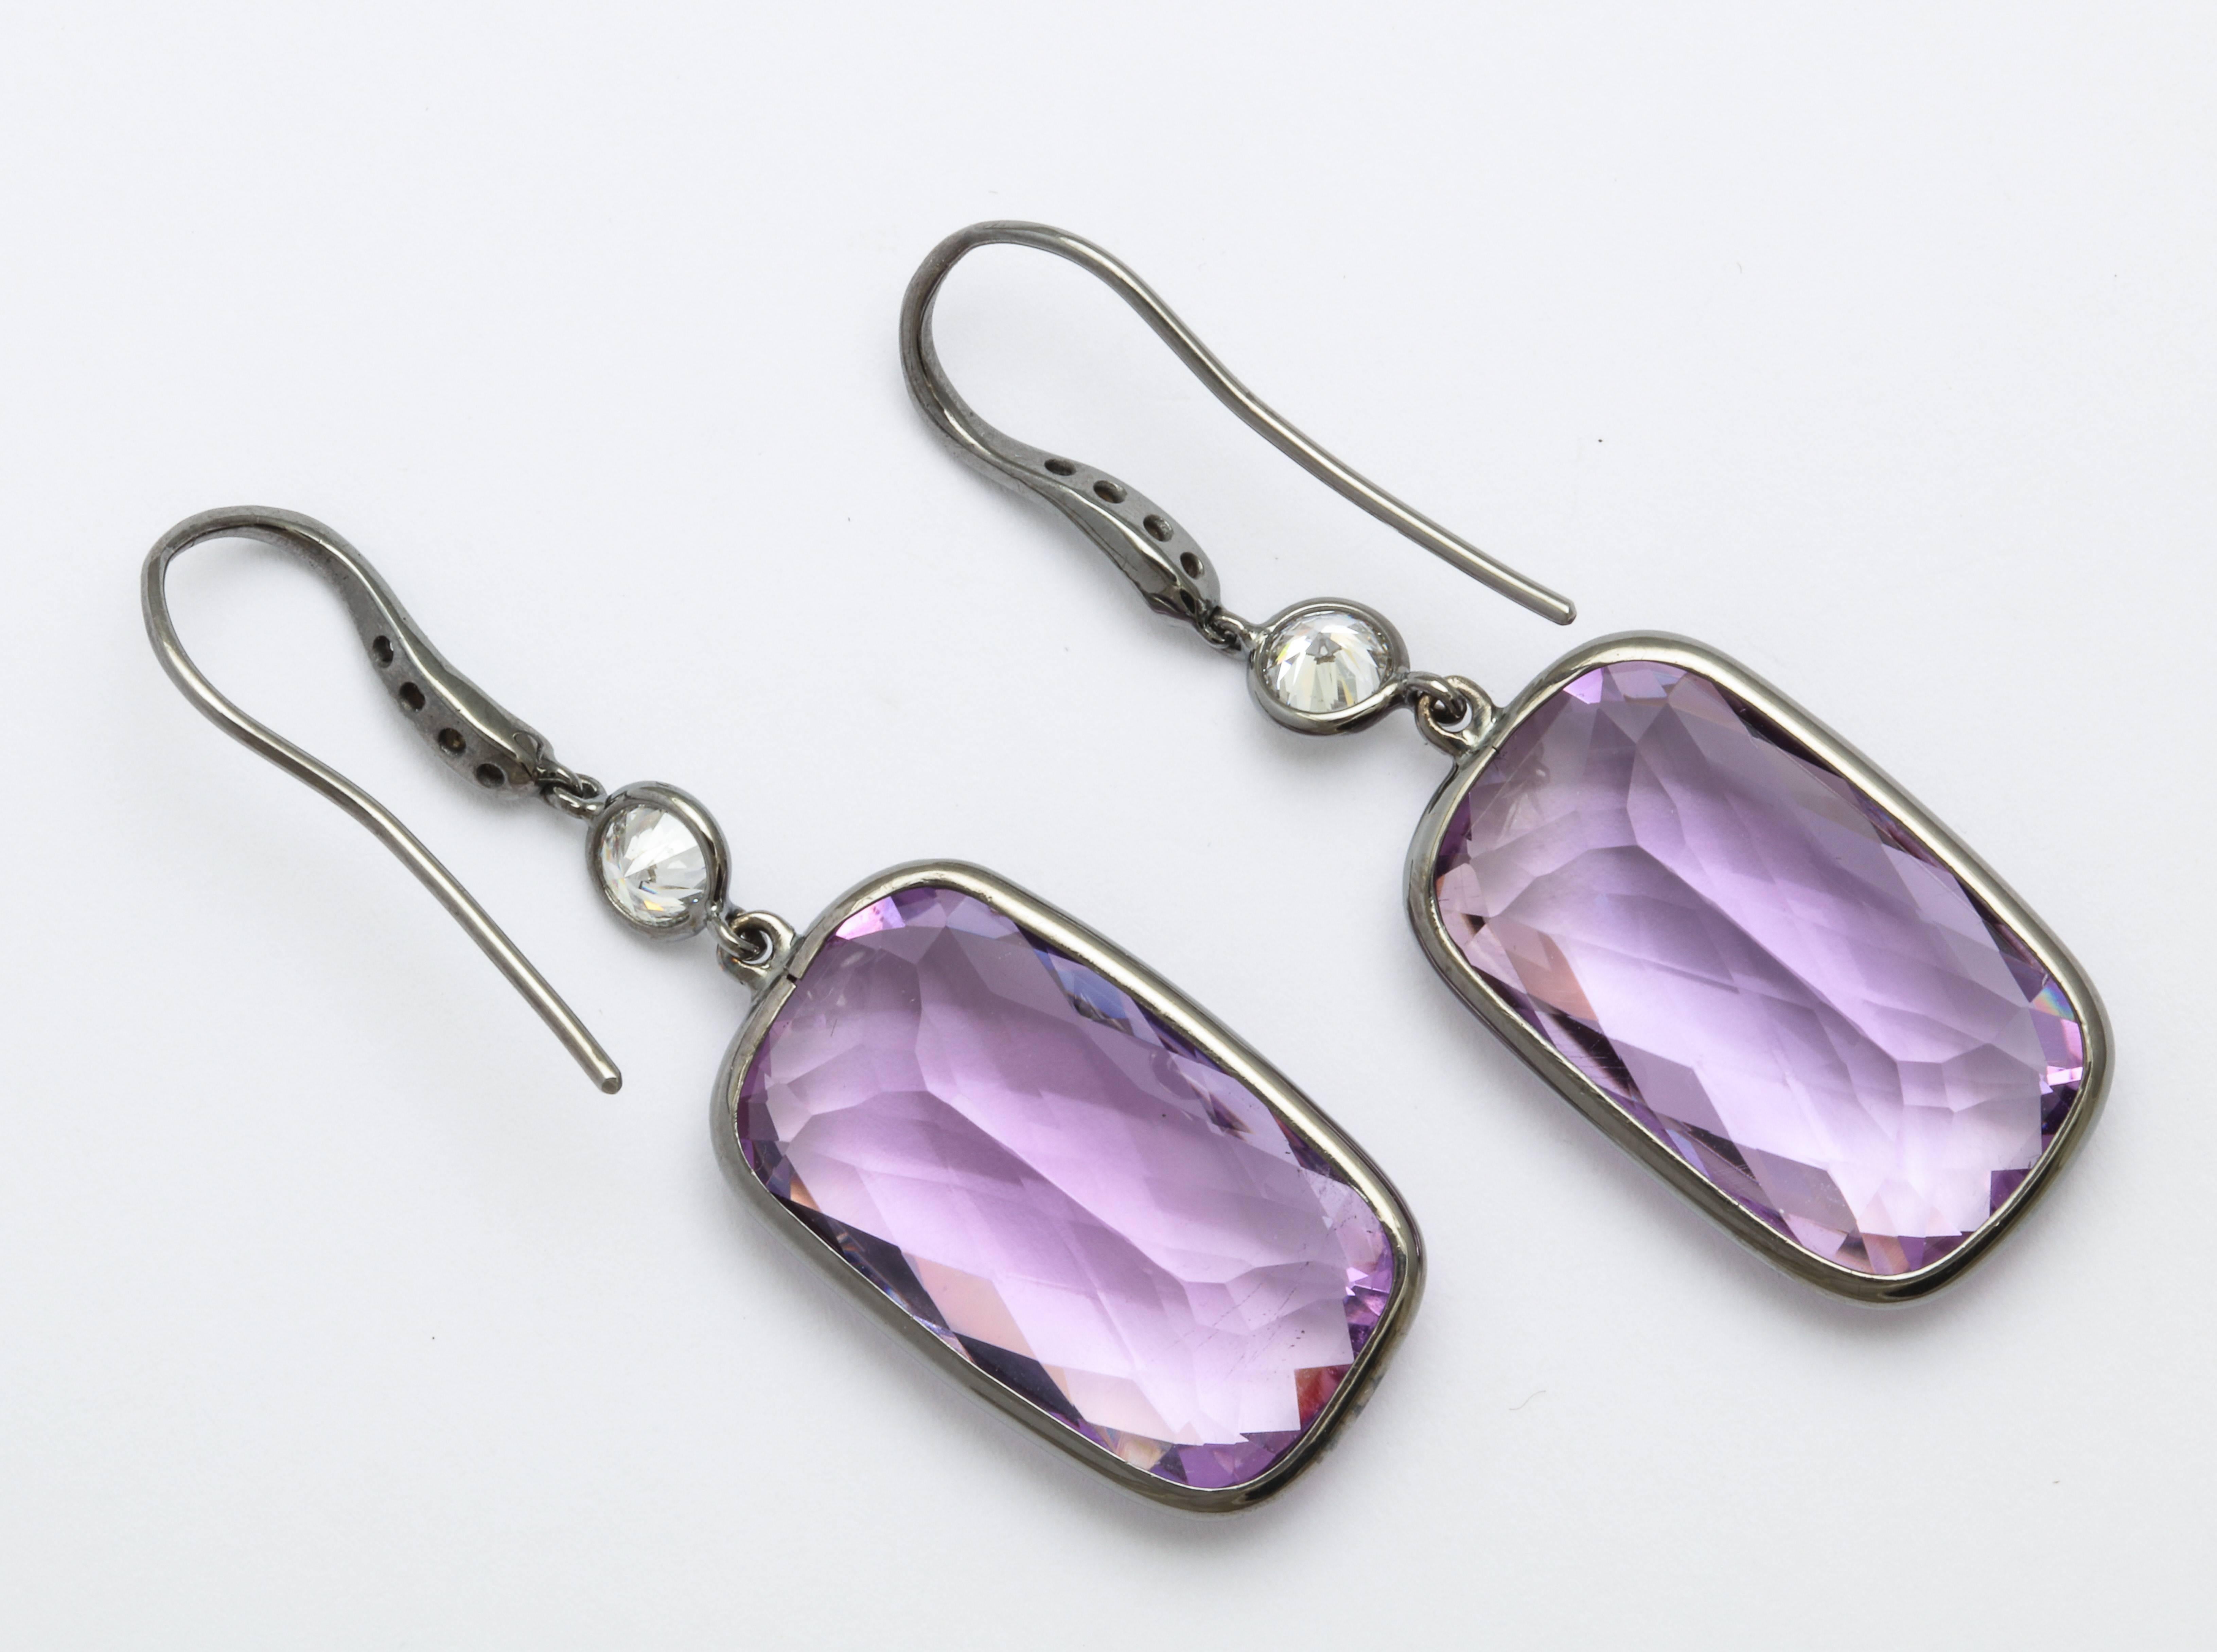 A pair of 18 karat white gold earrings, rhodium plated, with bezel set checkerboard cut amethysts, weighing 32.77 carats total. The earrings are accented with round brilliant cut diamonds, weighing 0.82 carats total. By Donna Vock Designs.